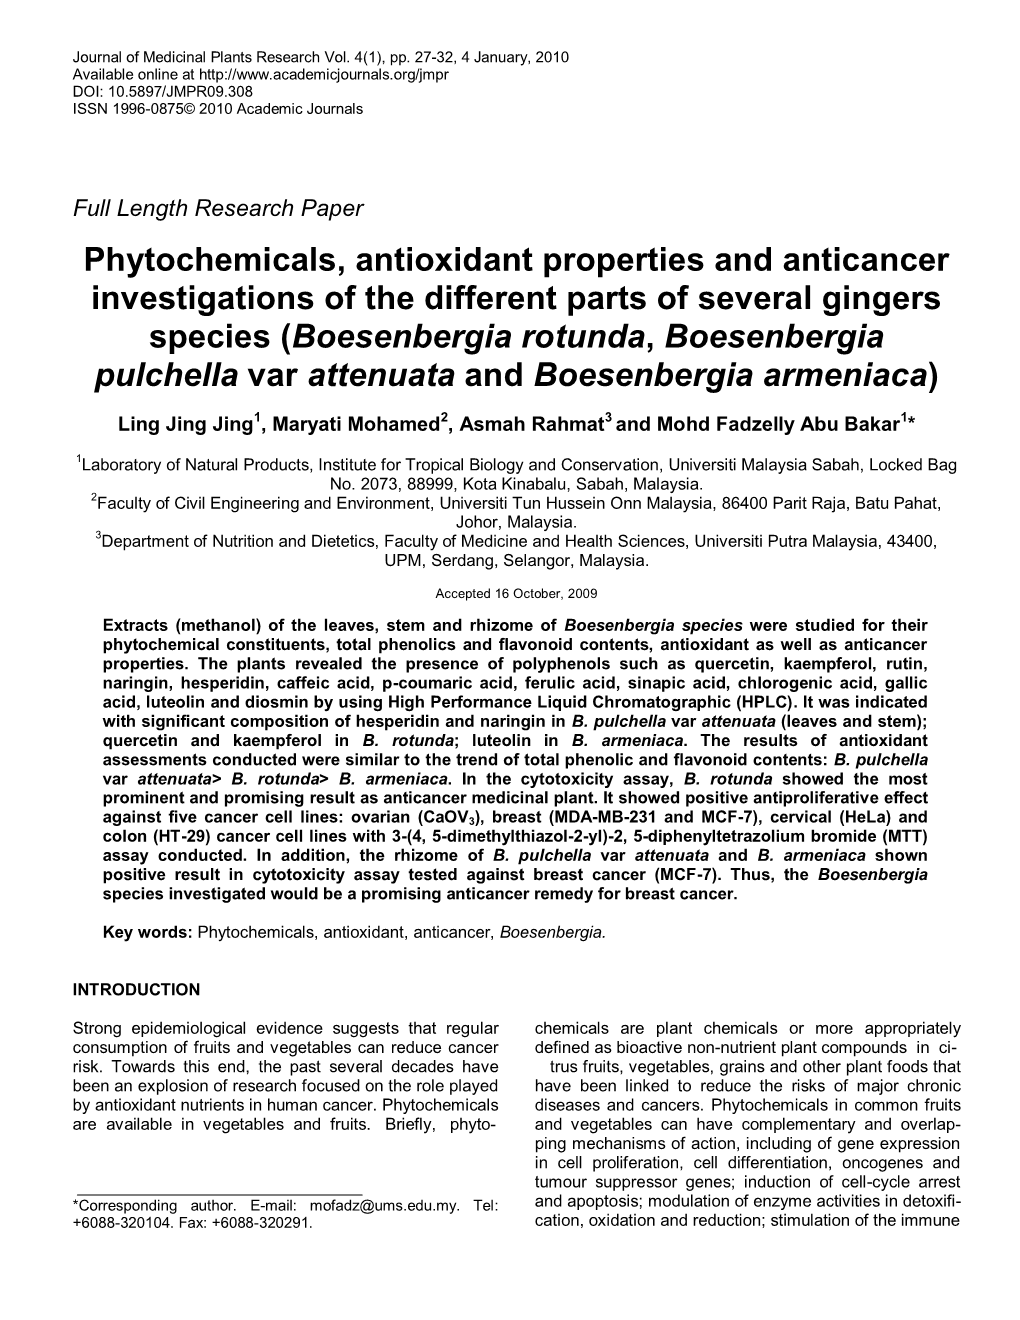 Phytochemicals, Antioxidant Properties and Anticancer Investigations of the Different Parts of Several Gingers Species